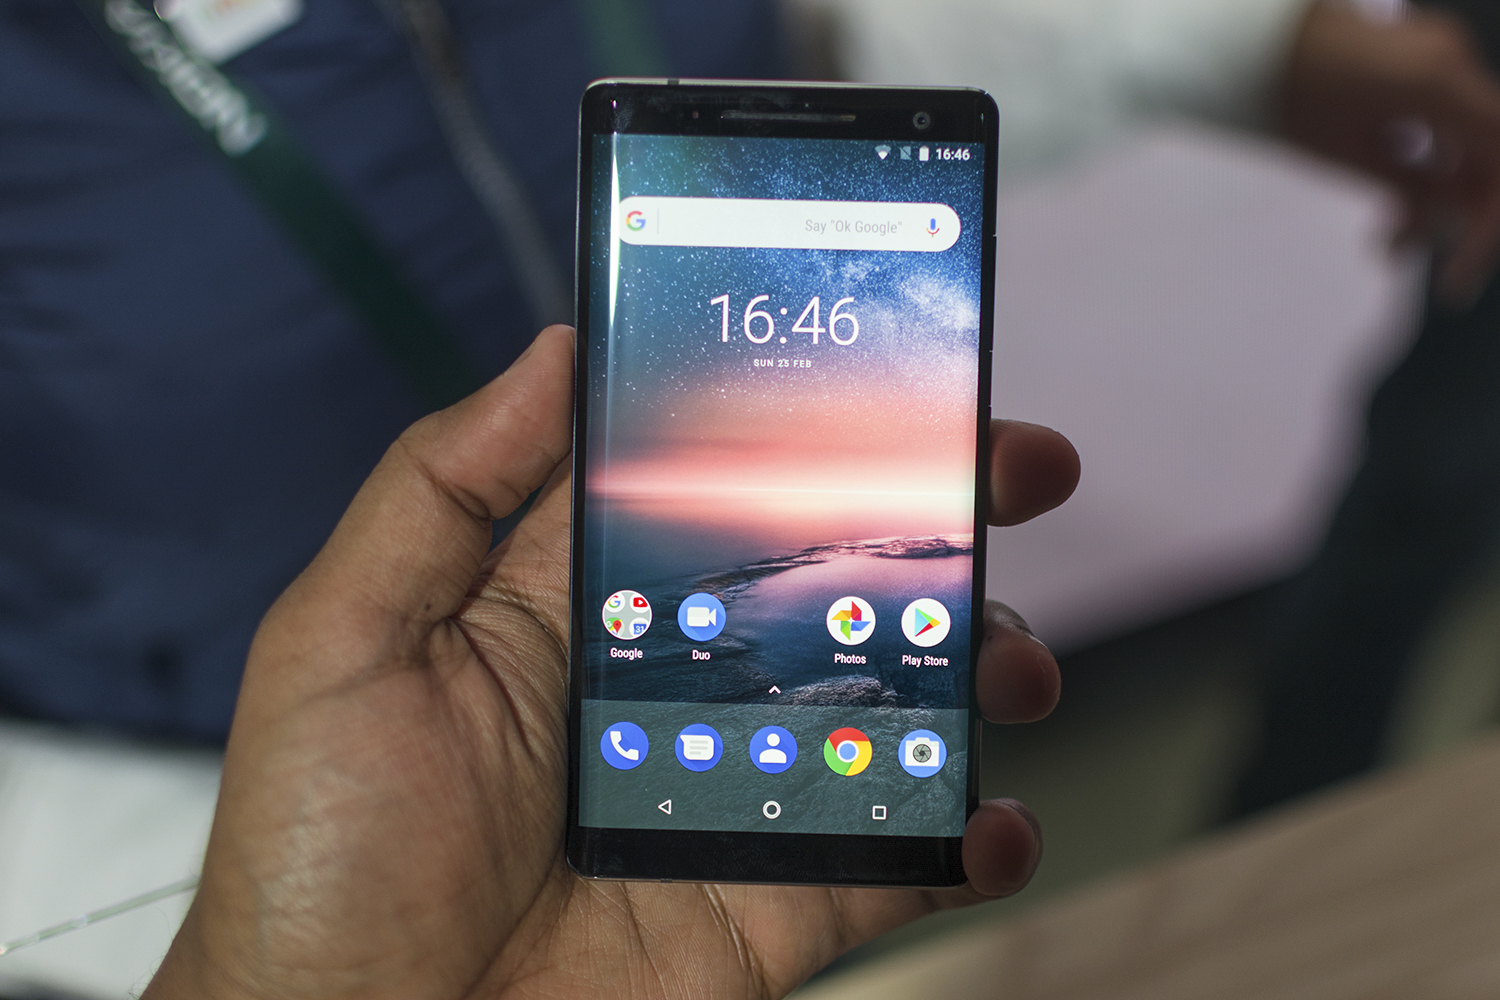 Nokia 8 Sirocco at MWC 2018